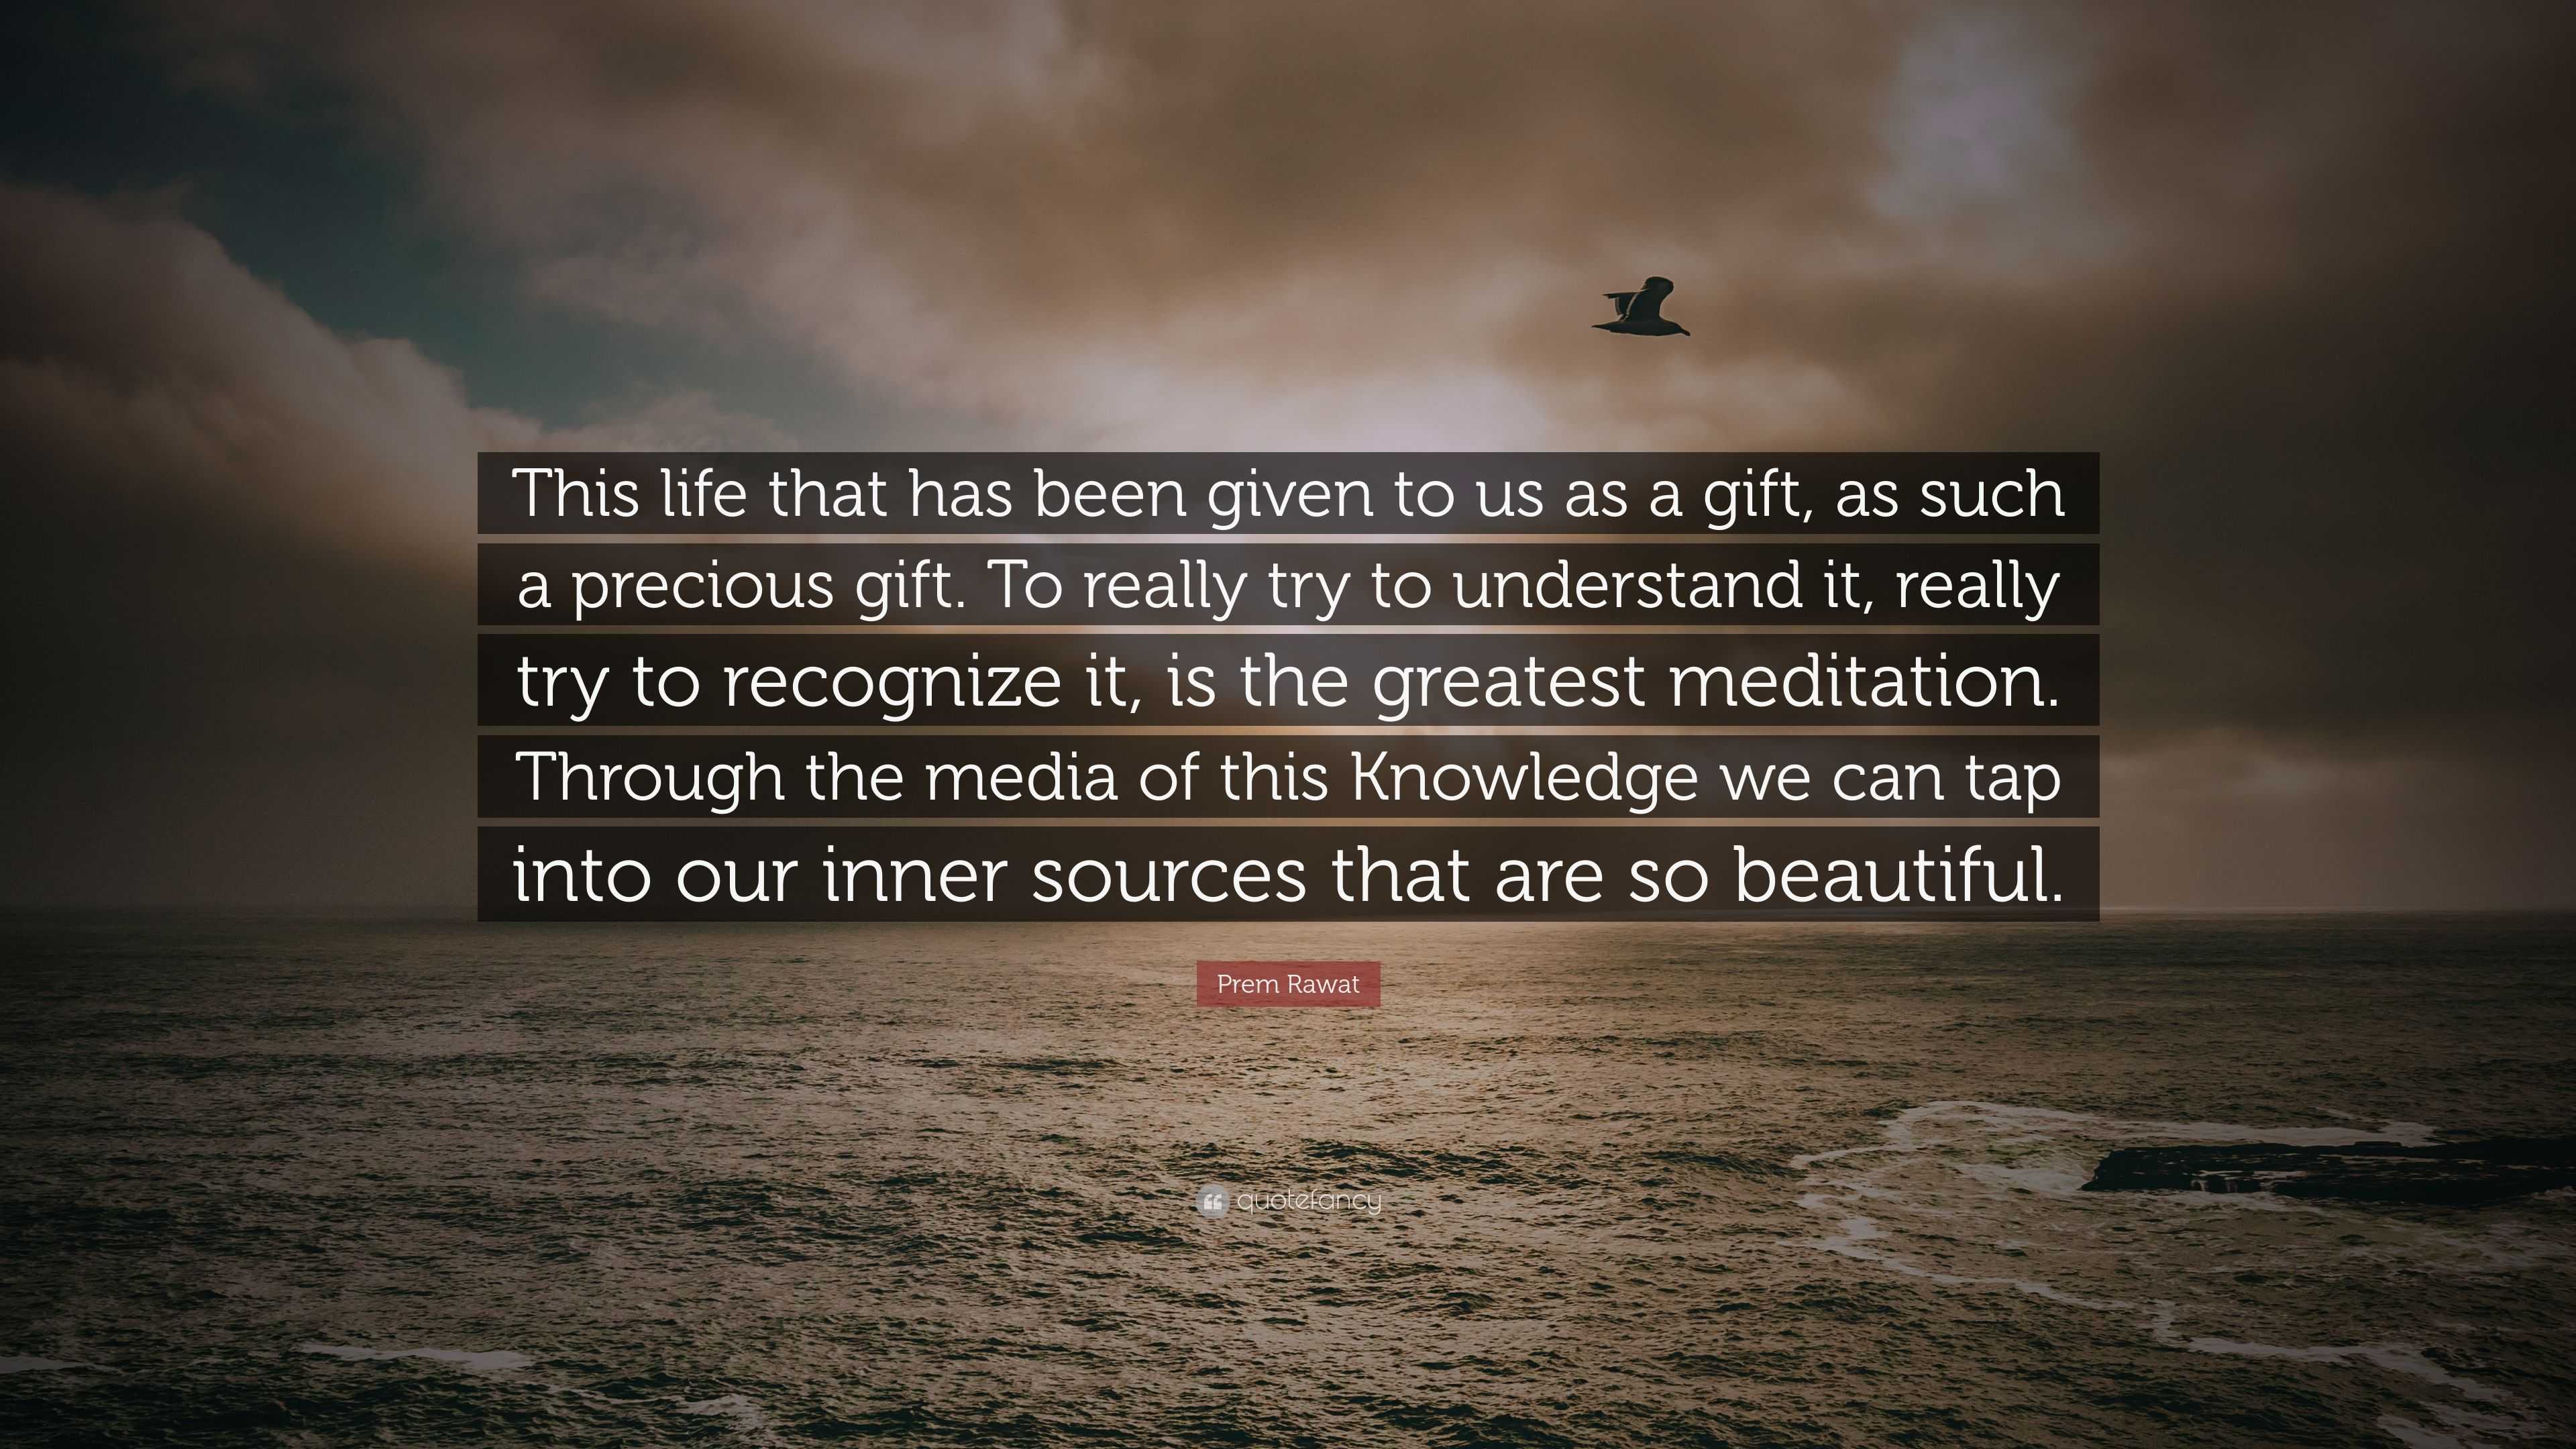 Prem Rawat Quote “This life that has been given to us as a t